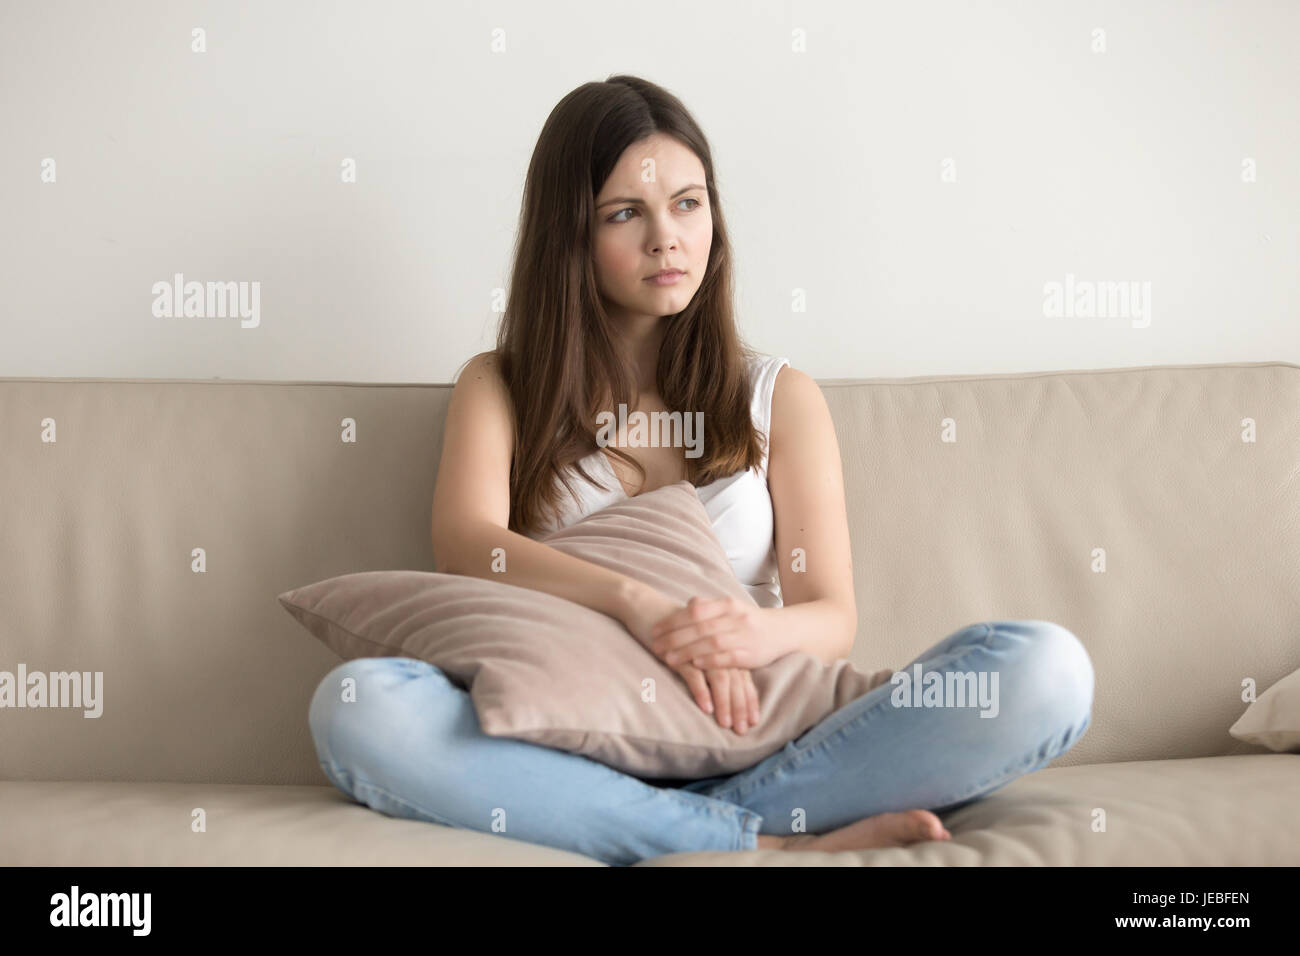 Concerned young woman sitting on sofa at home Stock Photo